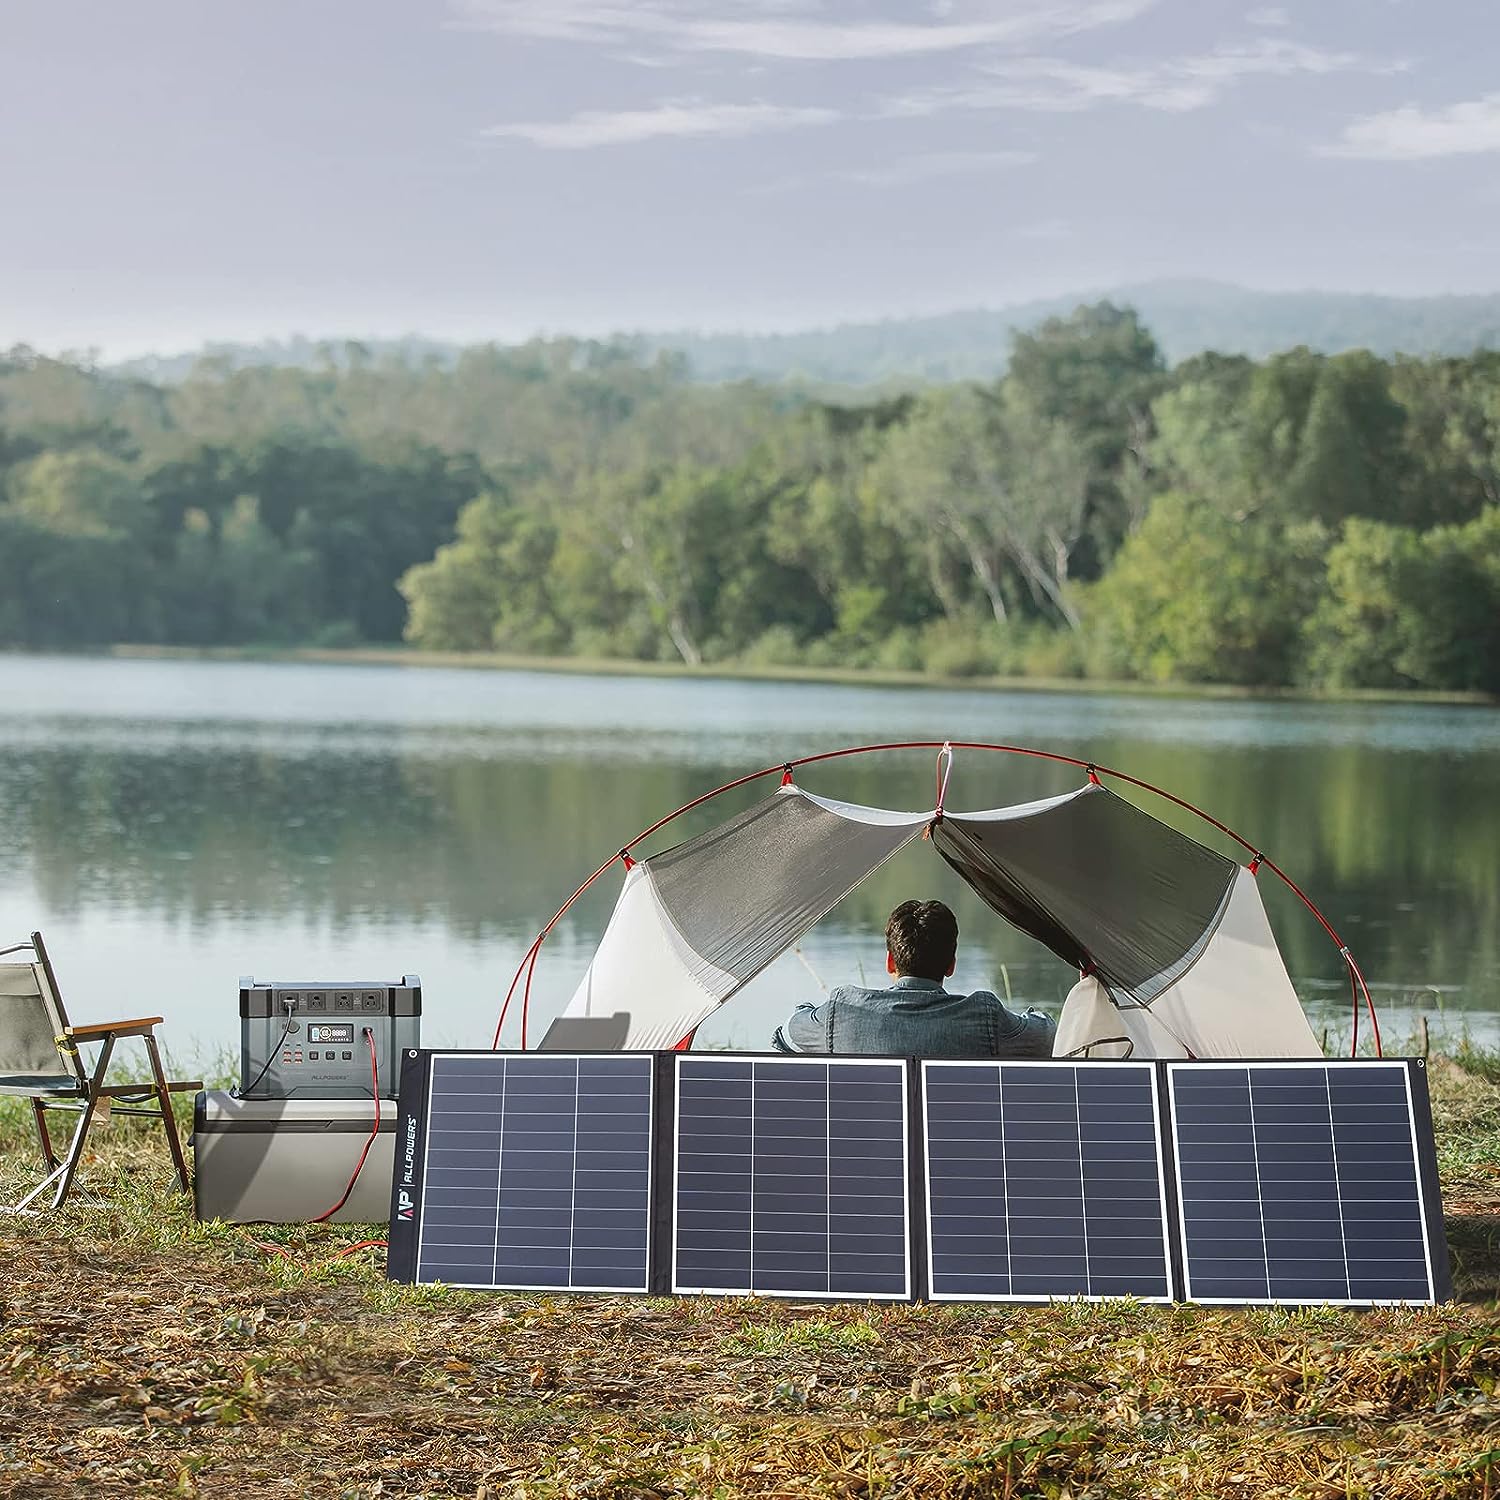 ALLPOWERS SP035 200W Portable Solar Panel Charger Review